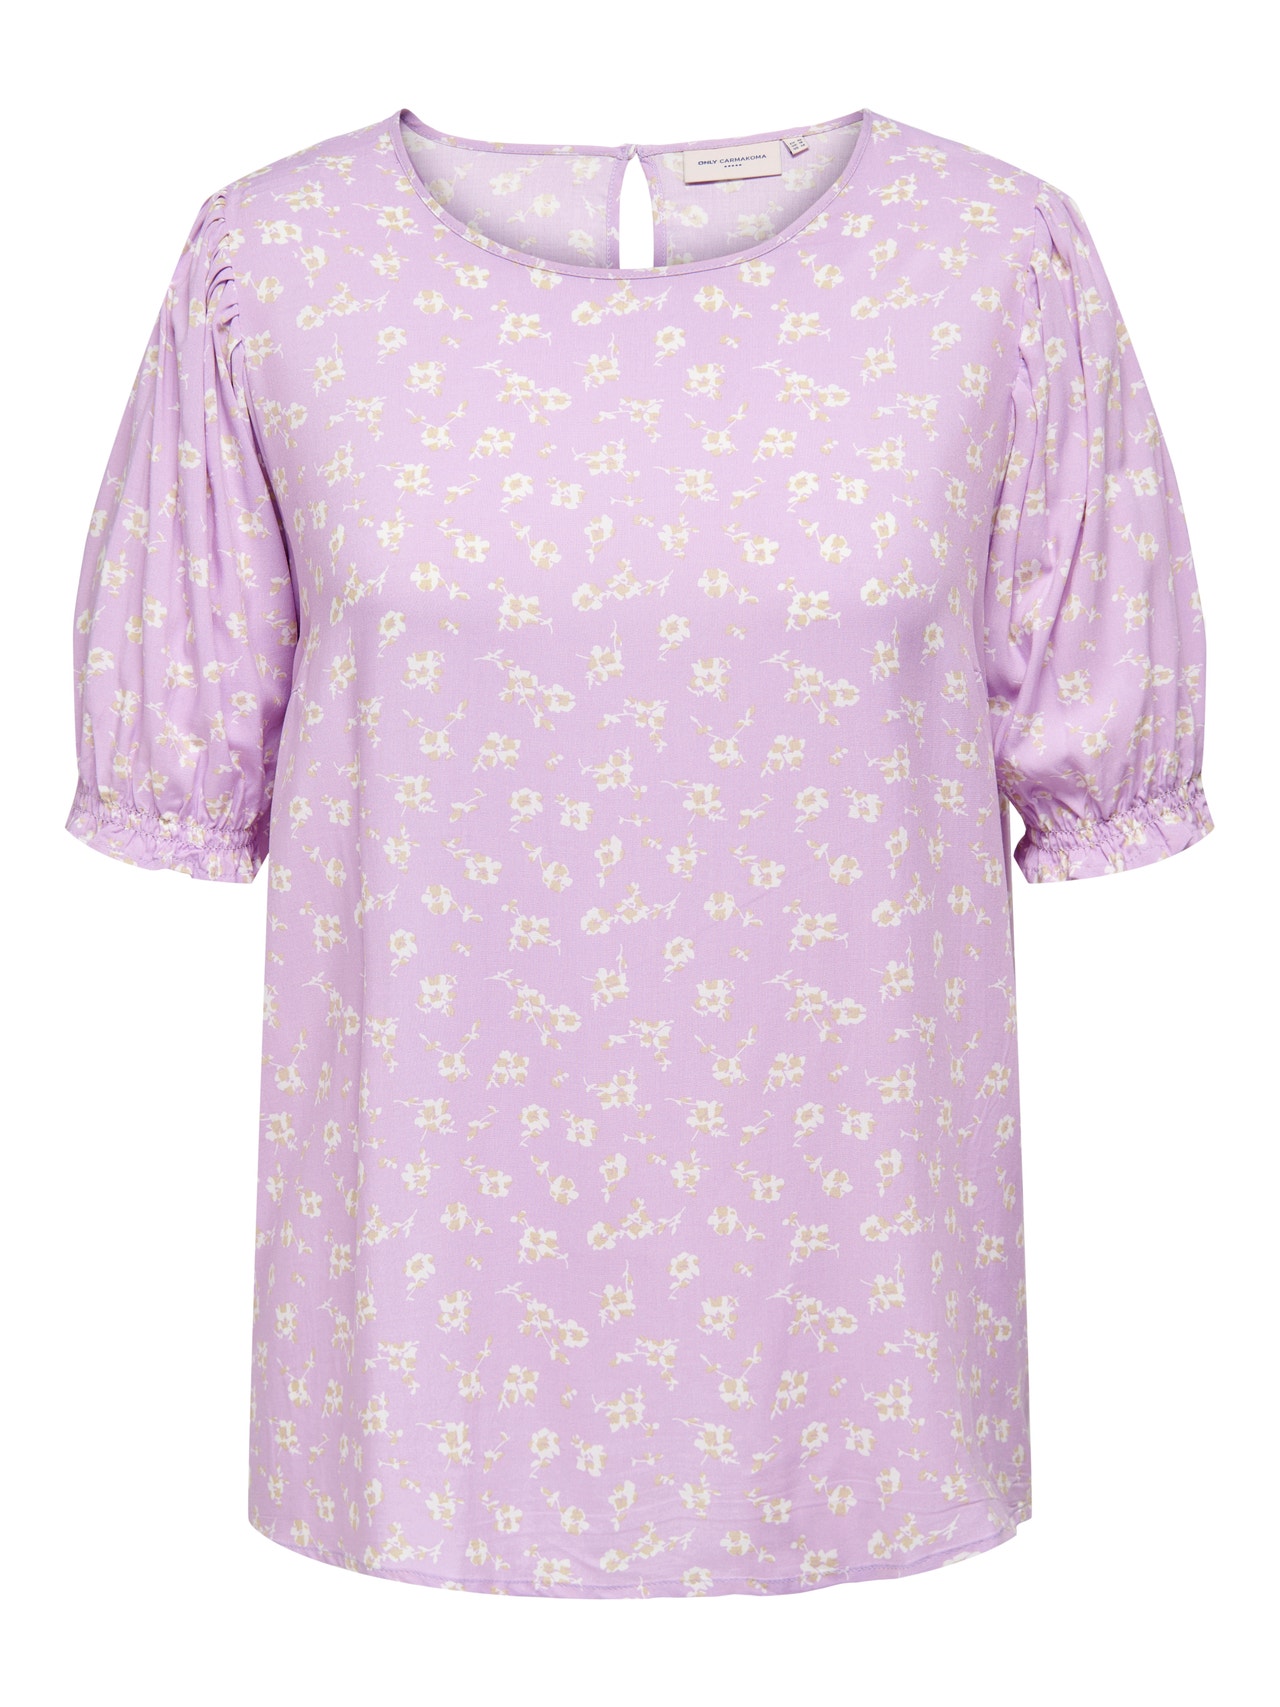 ONLY Curvy viscose Short Sleeved Top -Orchid Bouquet - 15269035